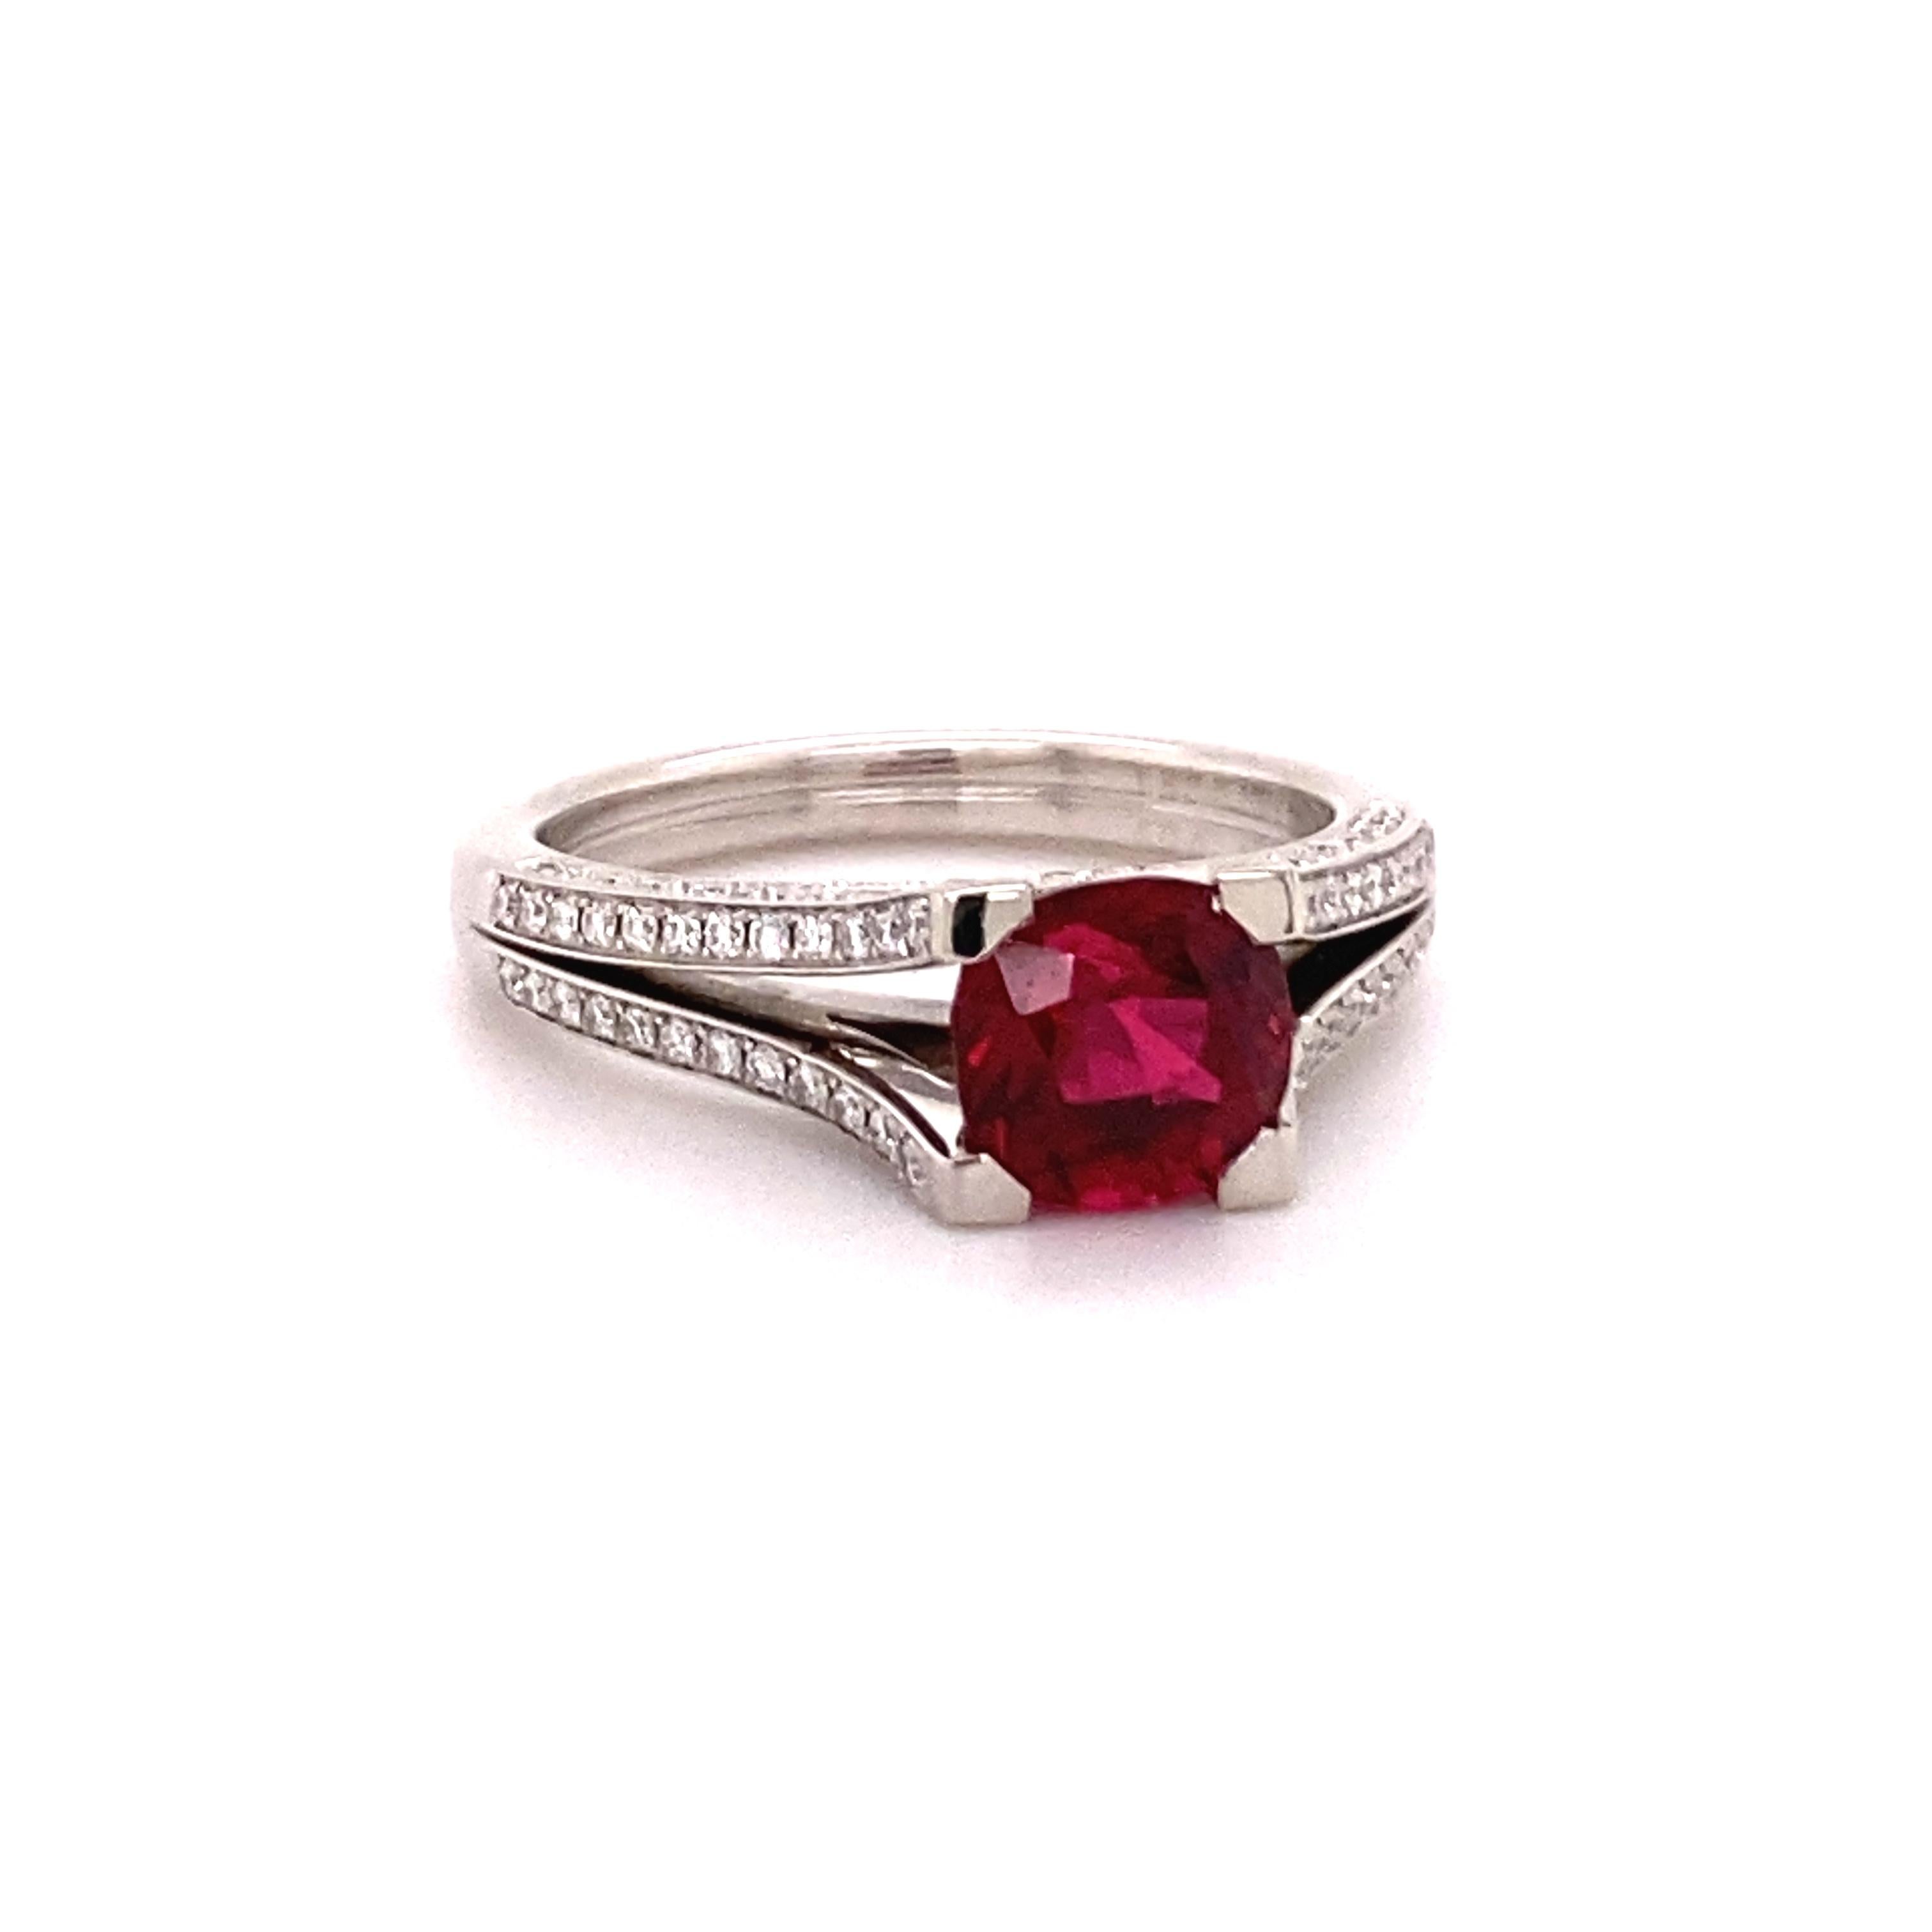 Wonderful, vivid red, cushion-cut Spinel weighting 1.64 ct. Fine setting in 18k white gold, decorated with 134 brilliant-cut diamonds of F/G colour and vs clarity totalling 0.44 ct. Designed as light, angular channels crossing at the bridge of the